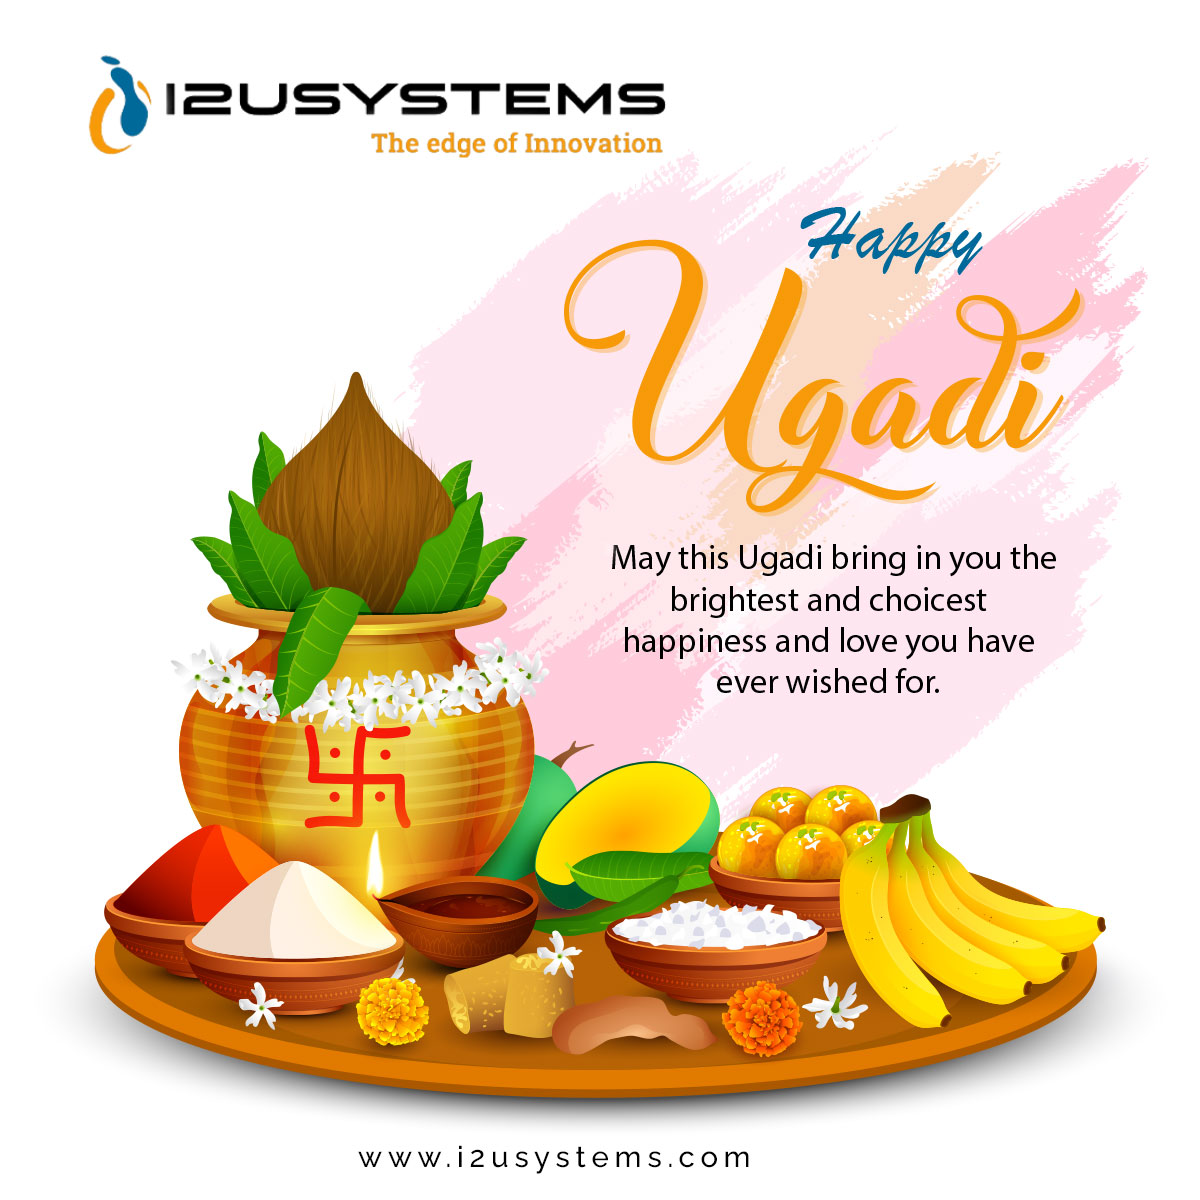 Happy Ugadi..! 'May this Ugadi bring in you the brightest and choicest happiness and love you have ever wished for.' #i2usystems #c2crequirements #w2jobs #directclient #usajobs #stategovernment #jobs #recruiters #benchsales #IOT #happy #ugadi #health #wealth #newyear